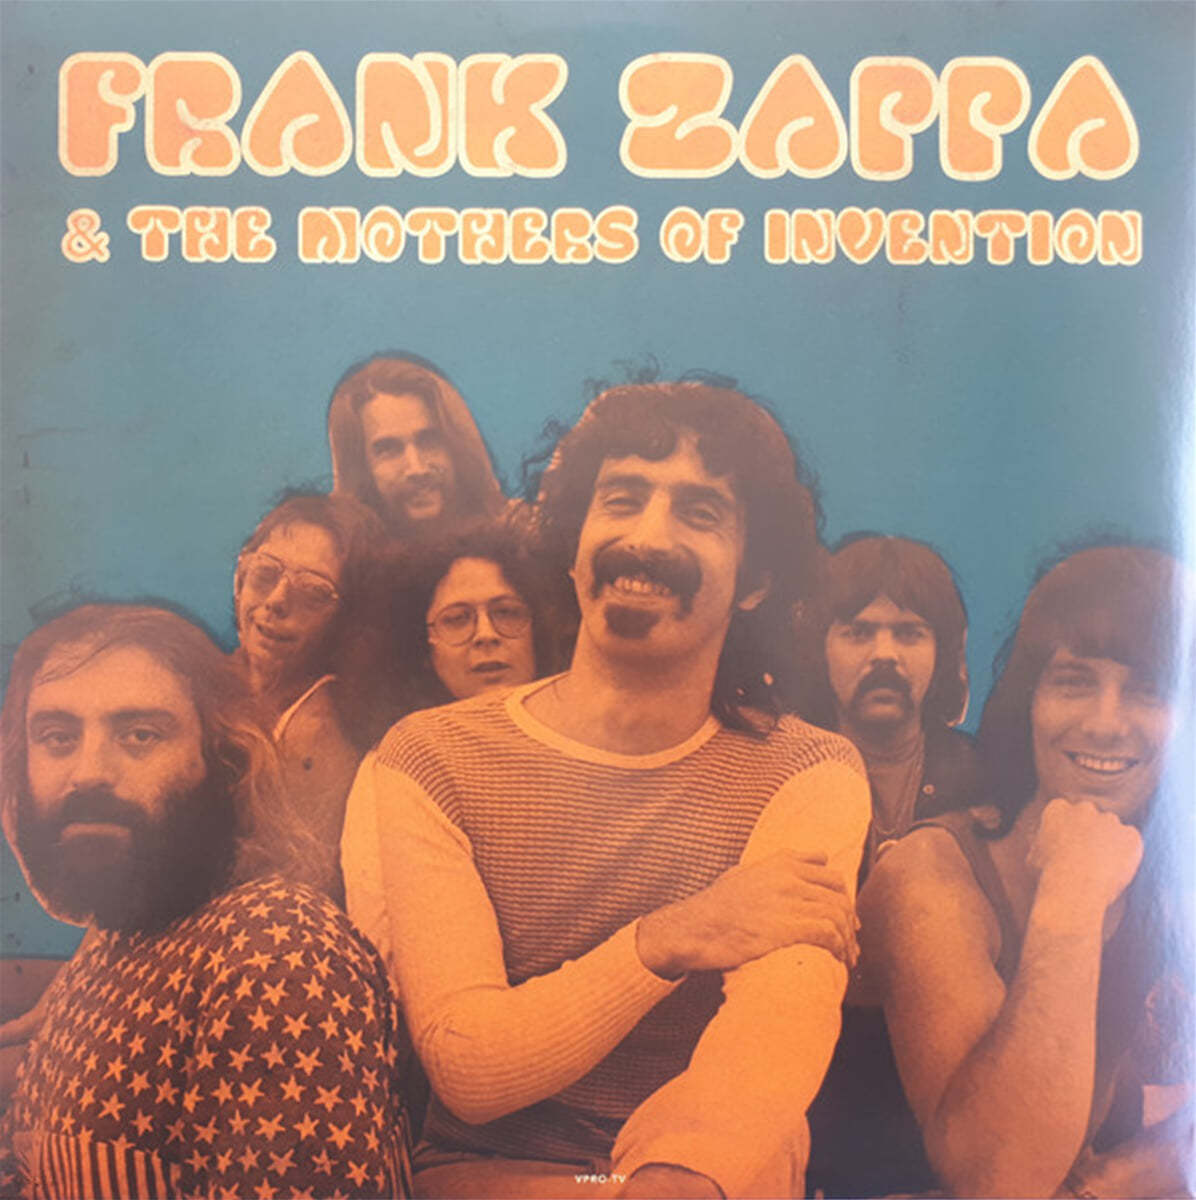 Frank Zappa & The Mothers of Invention (프랭크 자파 앤 더 마더스 오브 인벤션) - Live At The "Piknik" Show In Uddel, NL June 18th, 1970 [LP] 